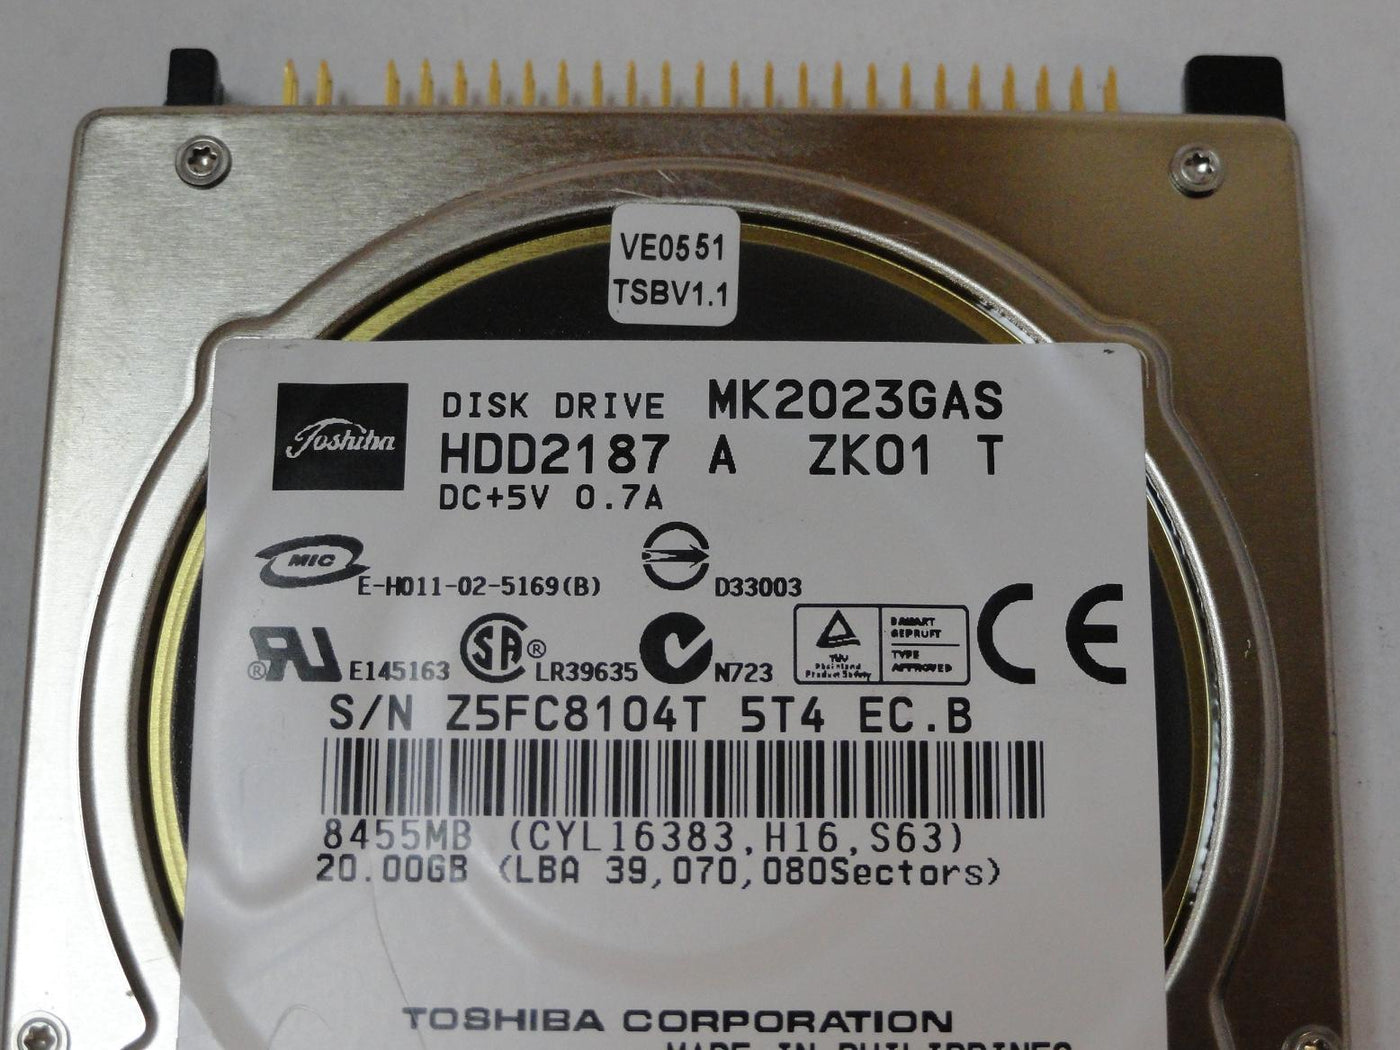 PR14903_HDD2187_Toshiba HP 20GB IDE 5400rpm 3.5in Laptop HDD - Image3